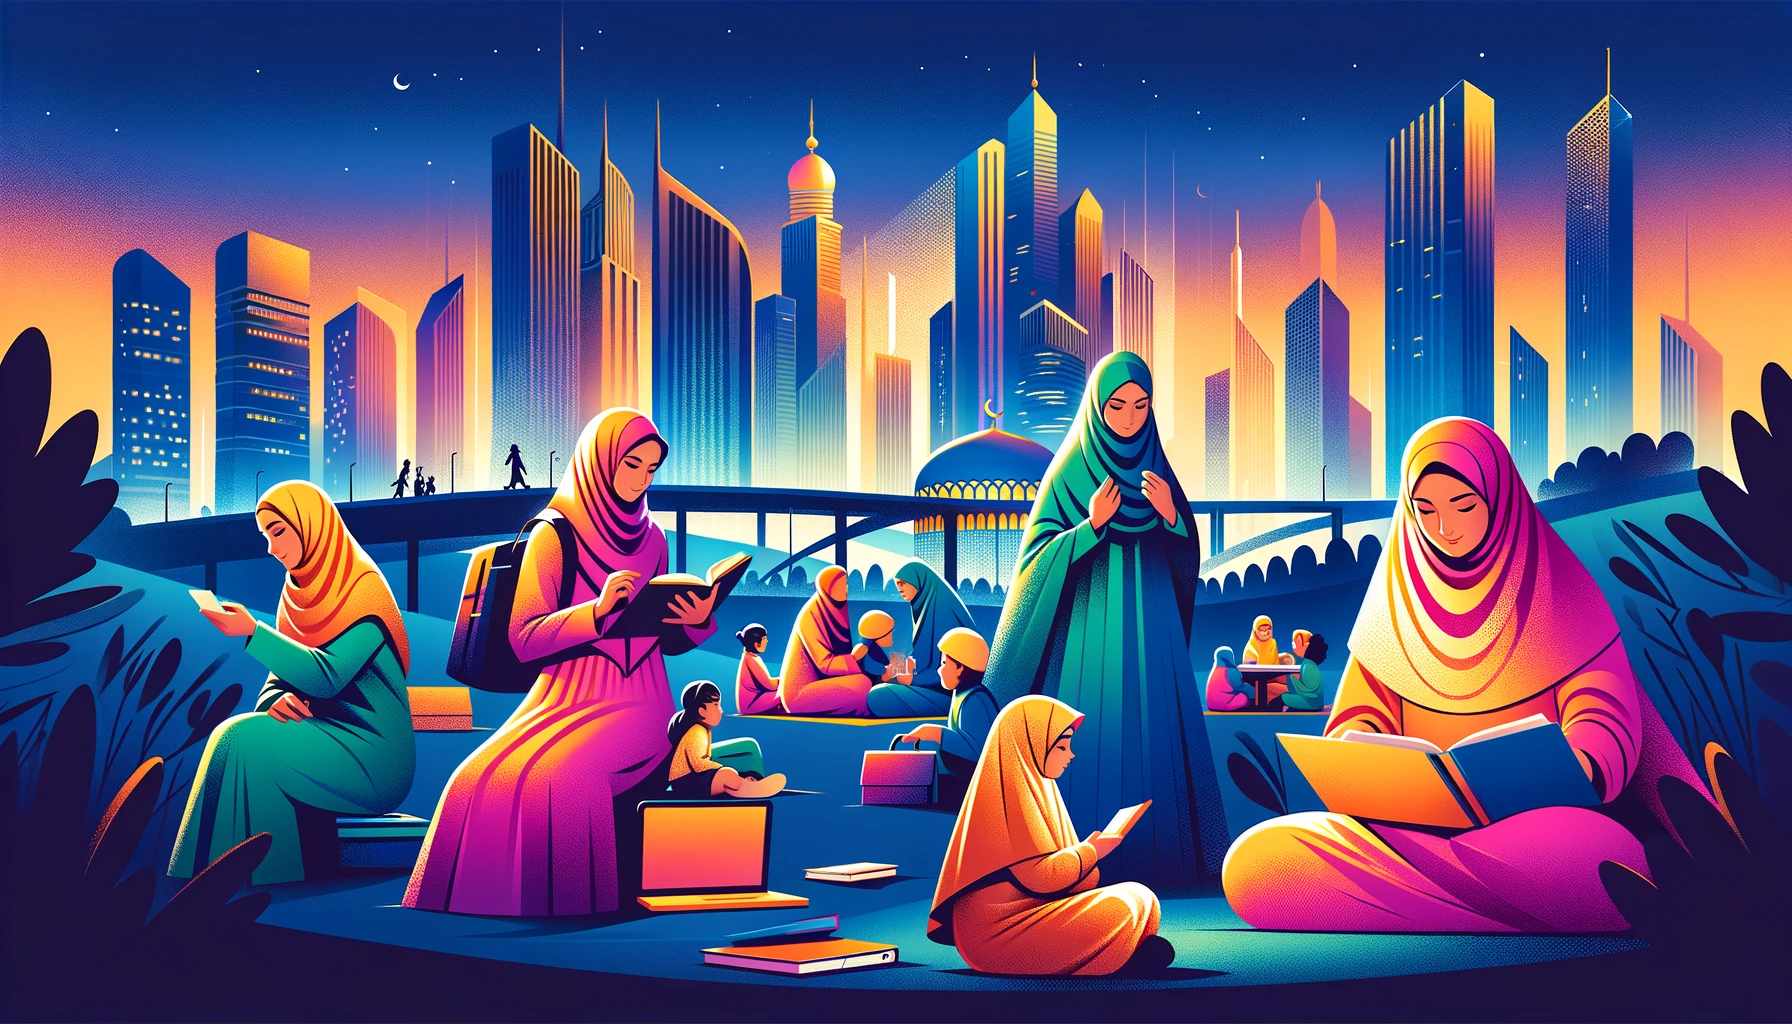 A vibrant and modern illustration that captures the dynamic role of Muslim women in Islam. The image should depict an urban setting with a skyline at twilight, blending traditional and contemporary elements. Include a group of Muslim women of various ages engaged in different activities: one reading a book, another using a laptop, and a third teaching a small group of children. Each woman should wear a hijab, symbolizing their faith. The composition should convey a sense of community, education, and empowerment. The colors should be bright and engaging, with an overall hopeful and energetic atmosphere.